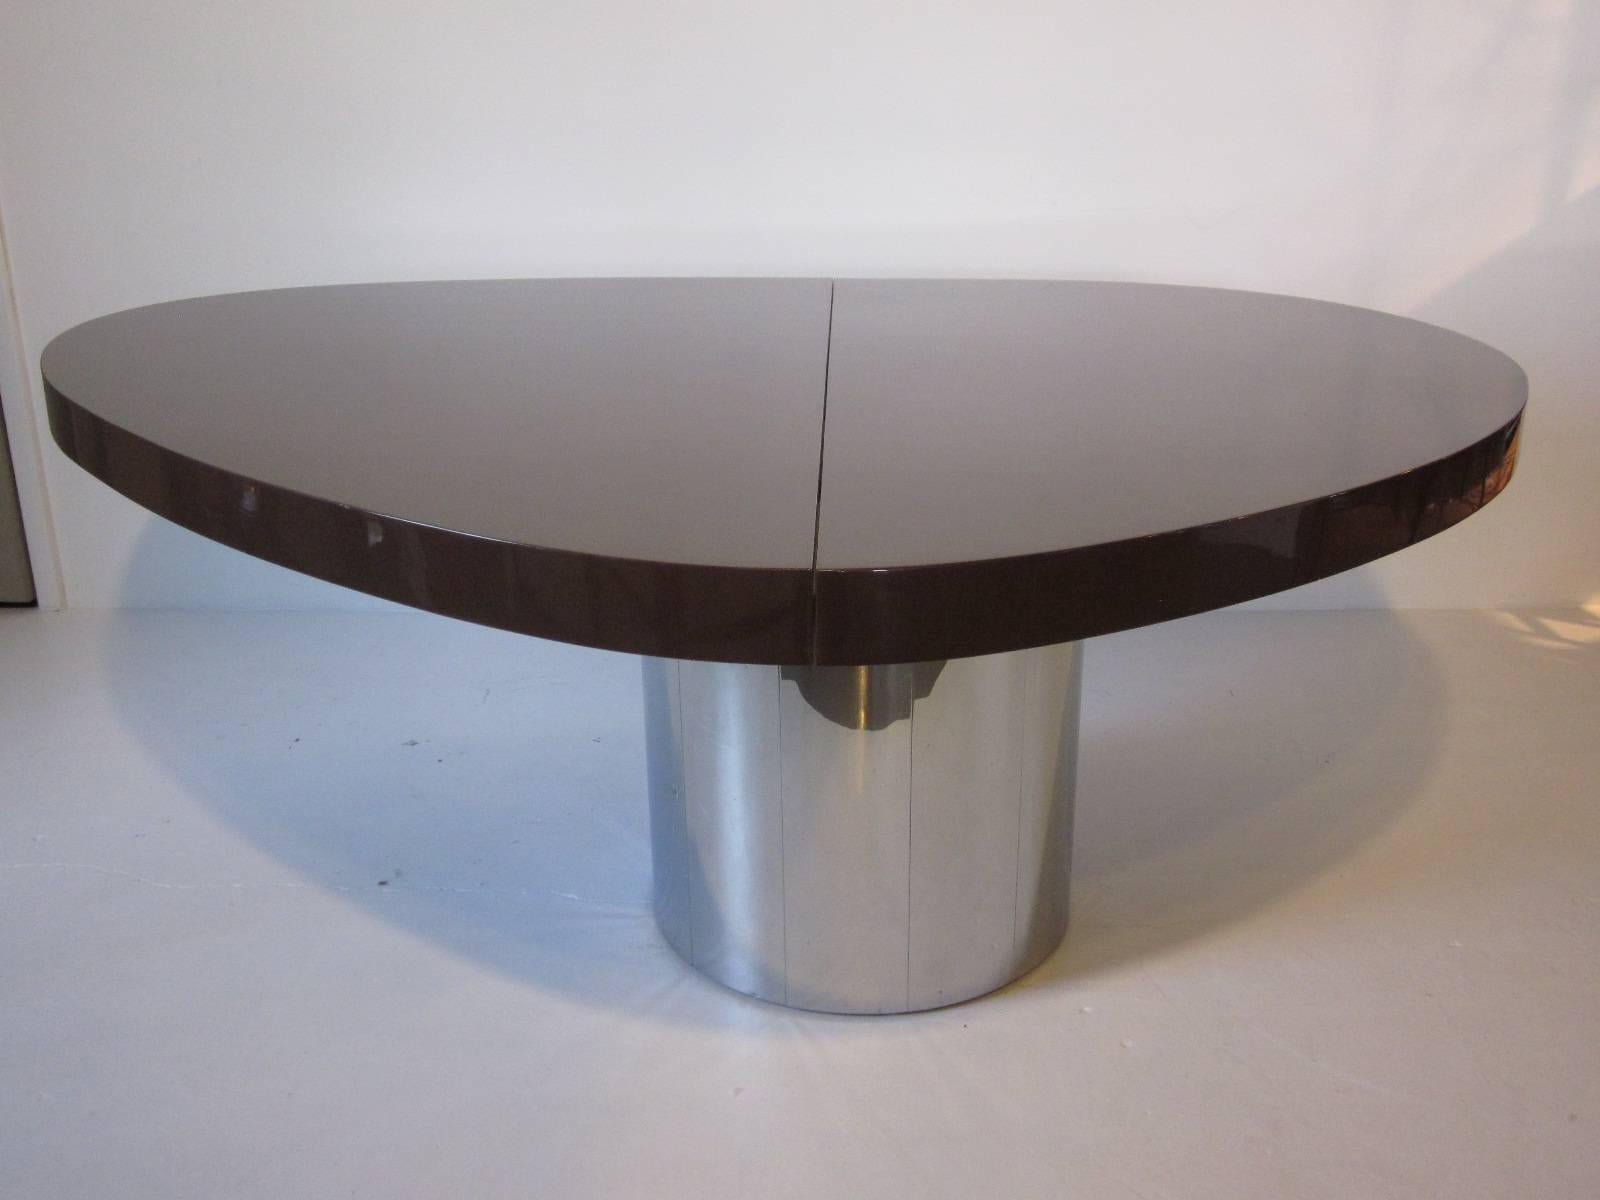 A 1970s dining or conference table designed by Paul Evans with dark chocolate brown heavy lacquered wood top. Two brushed stainless steel laminate leaves at 18.50